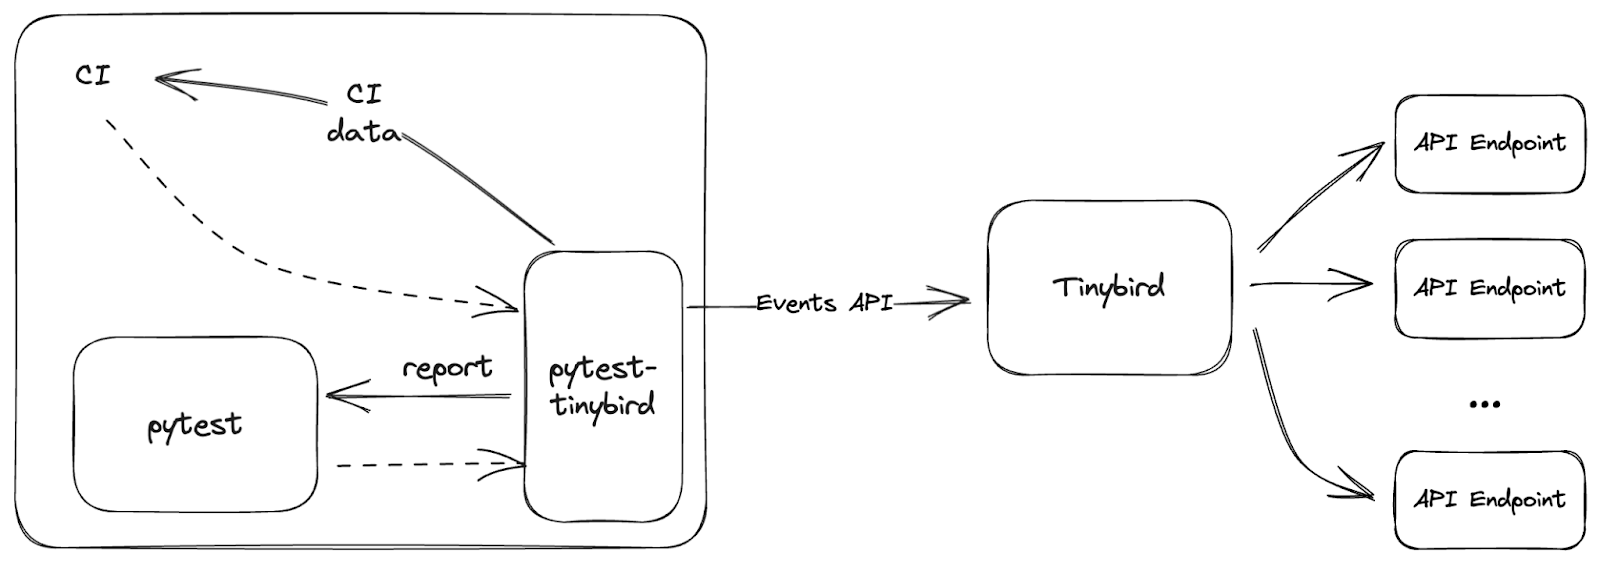 A diagram showing how the pytest-tinybird plugin works. pytest generates some data, and the plugin sends data to Tinybird, where metrics can be published as API Endpoints.